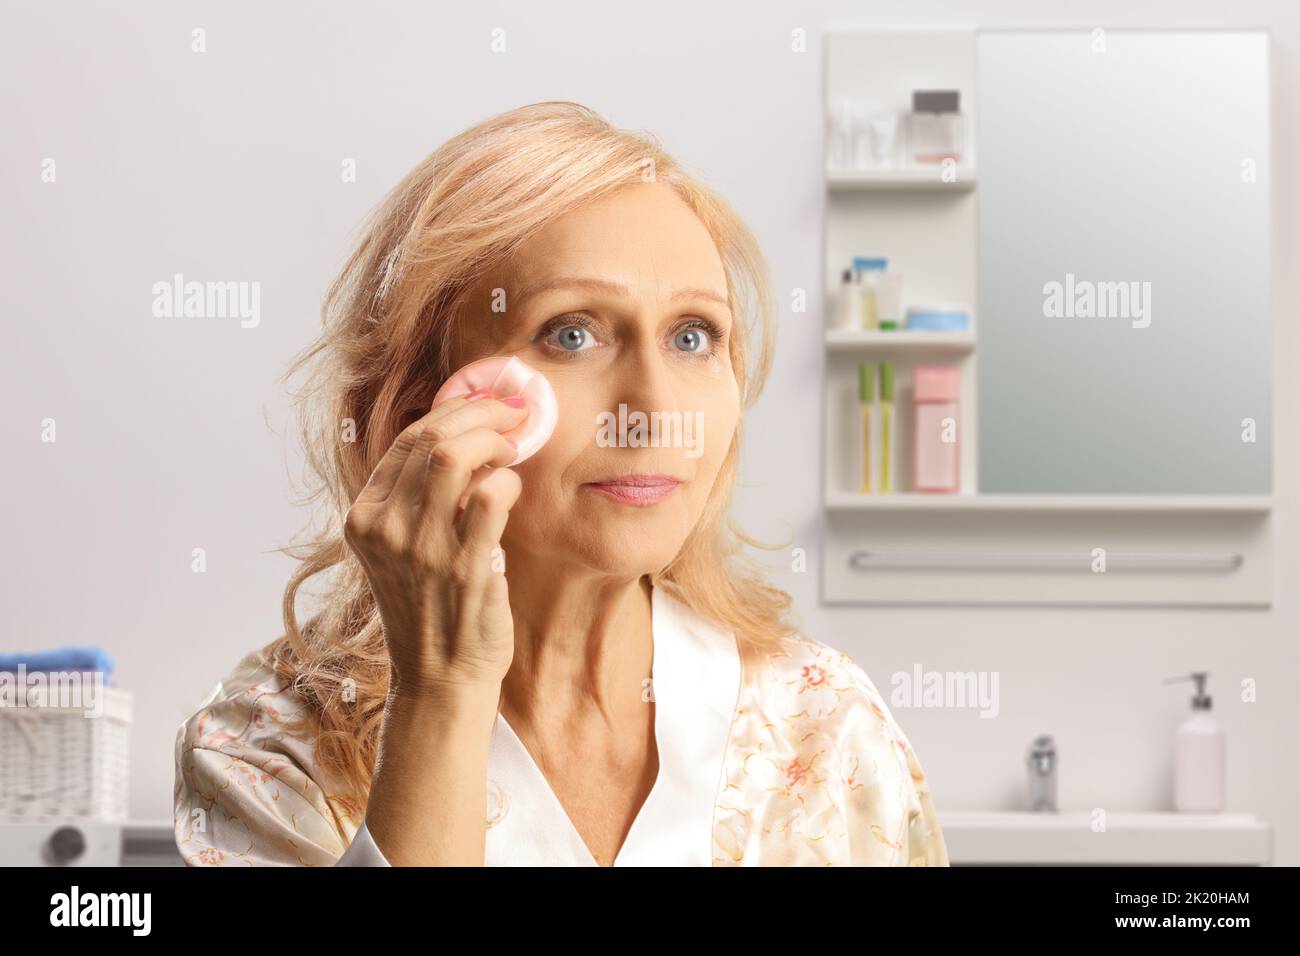 Mature woman using a face cotton pad inside a bathroom Stock Photo